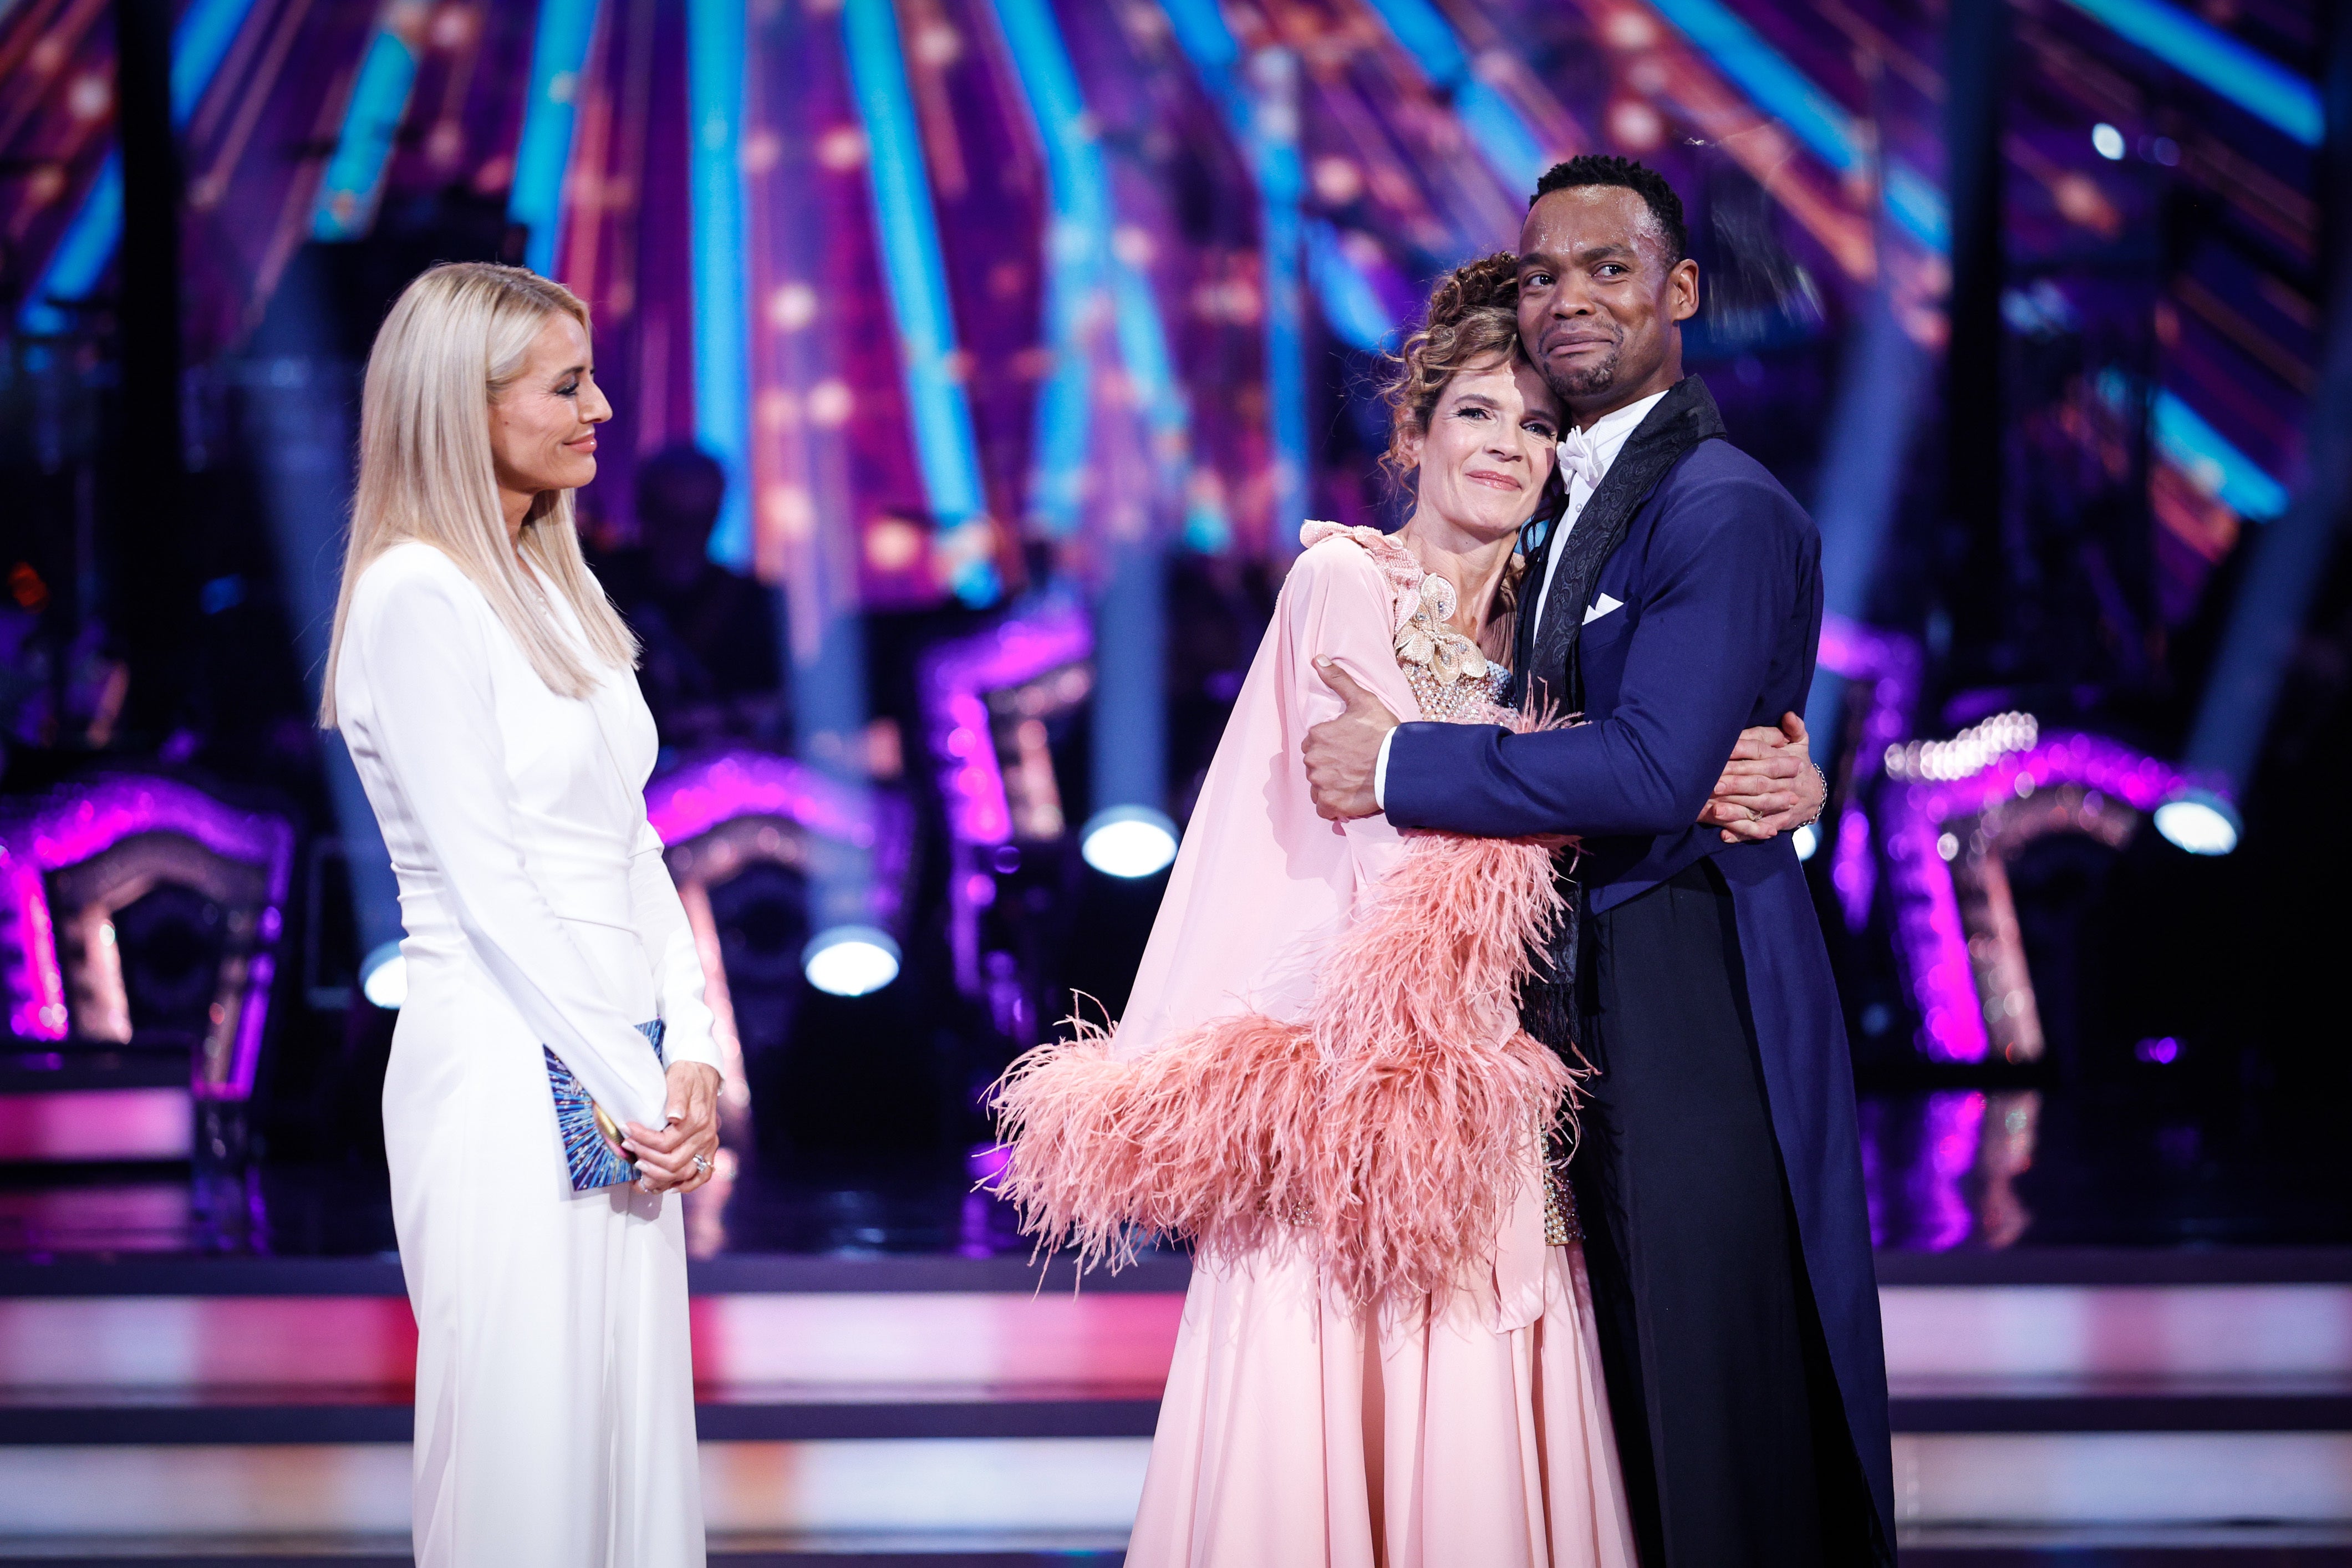 Annabel Croft and Johannes Radebe made it to the semi-finals of Strictly Come Dancing 2023